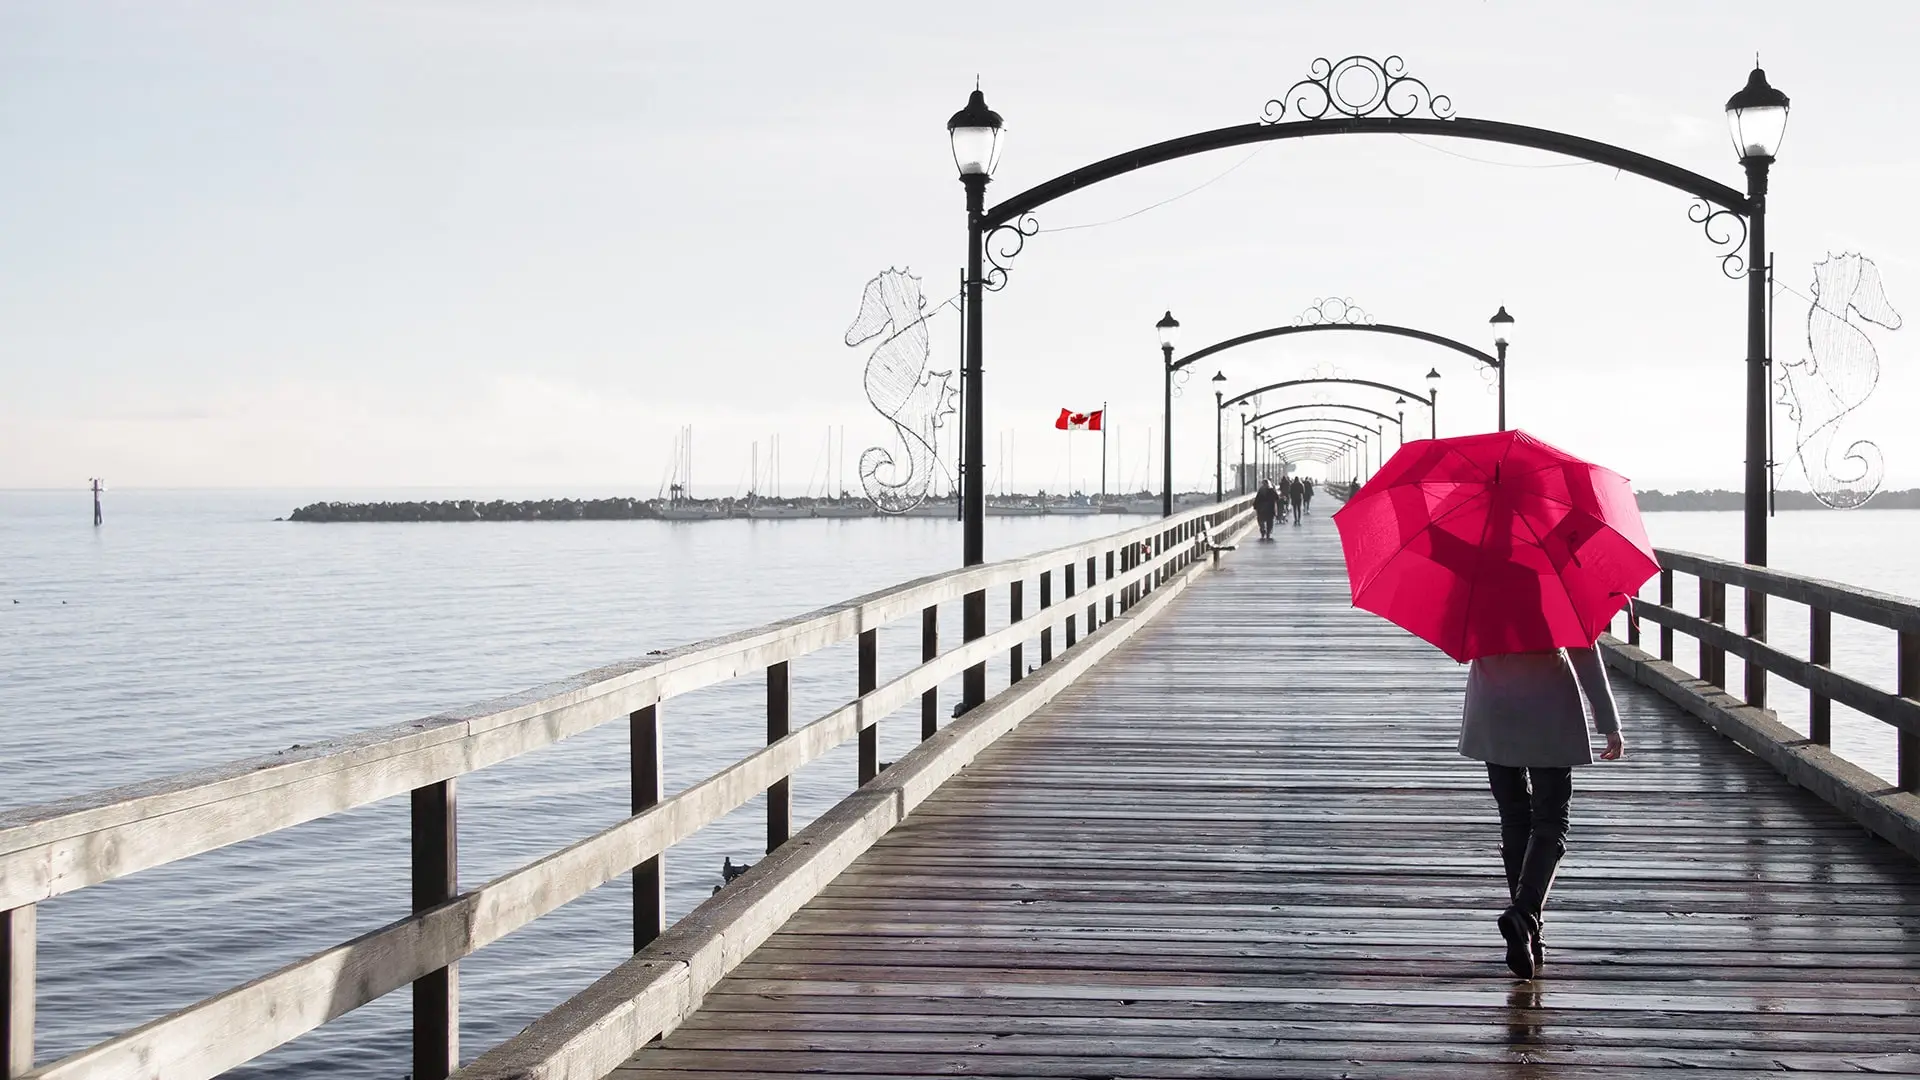 woman walking on pier holding umbrella over her head